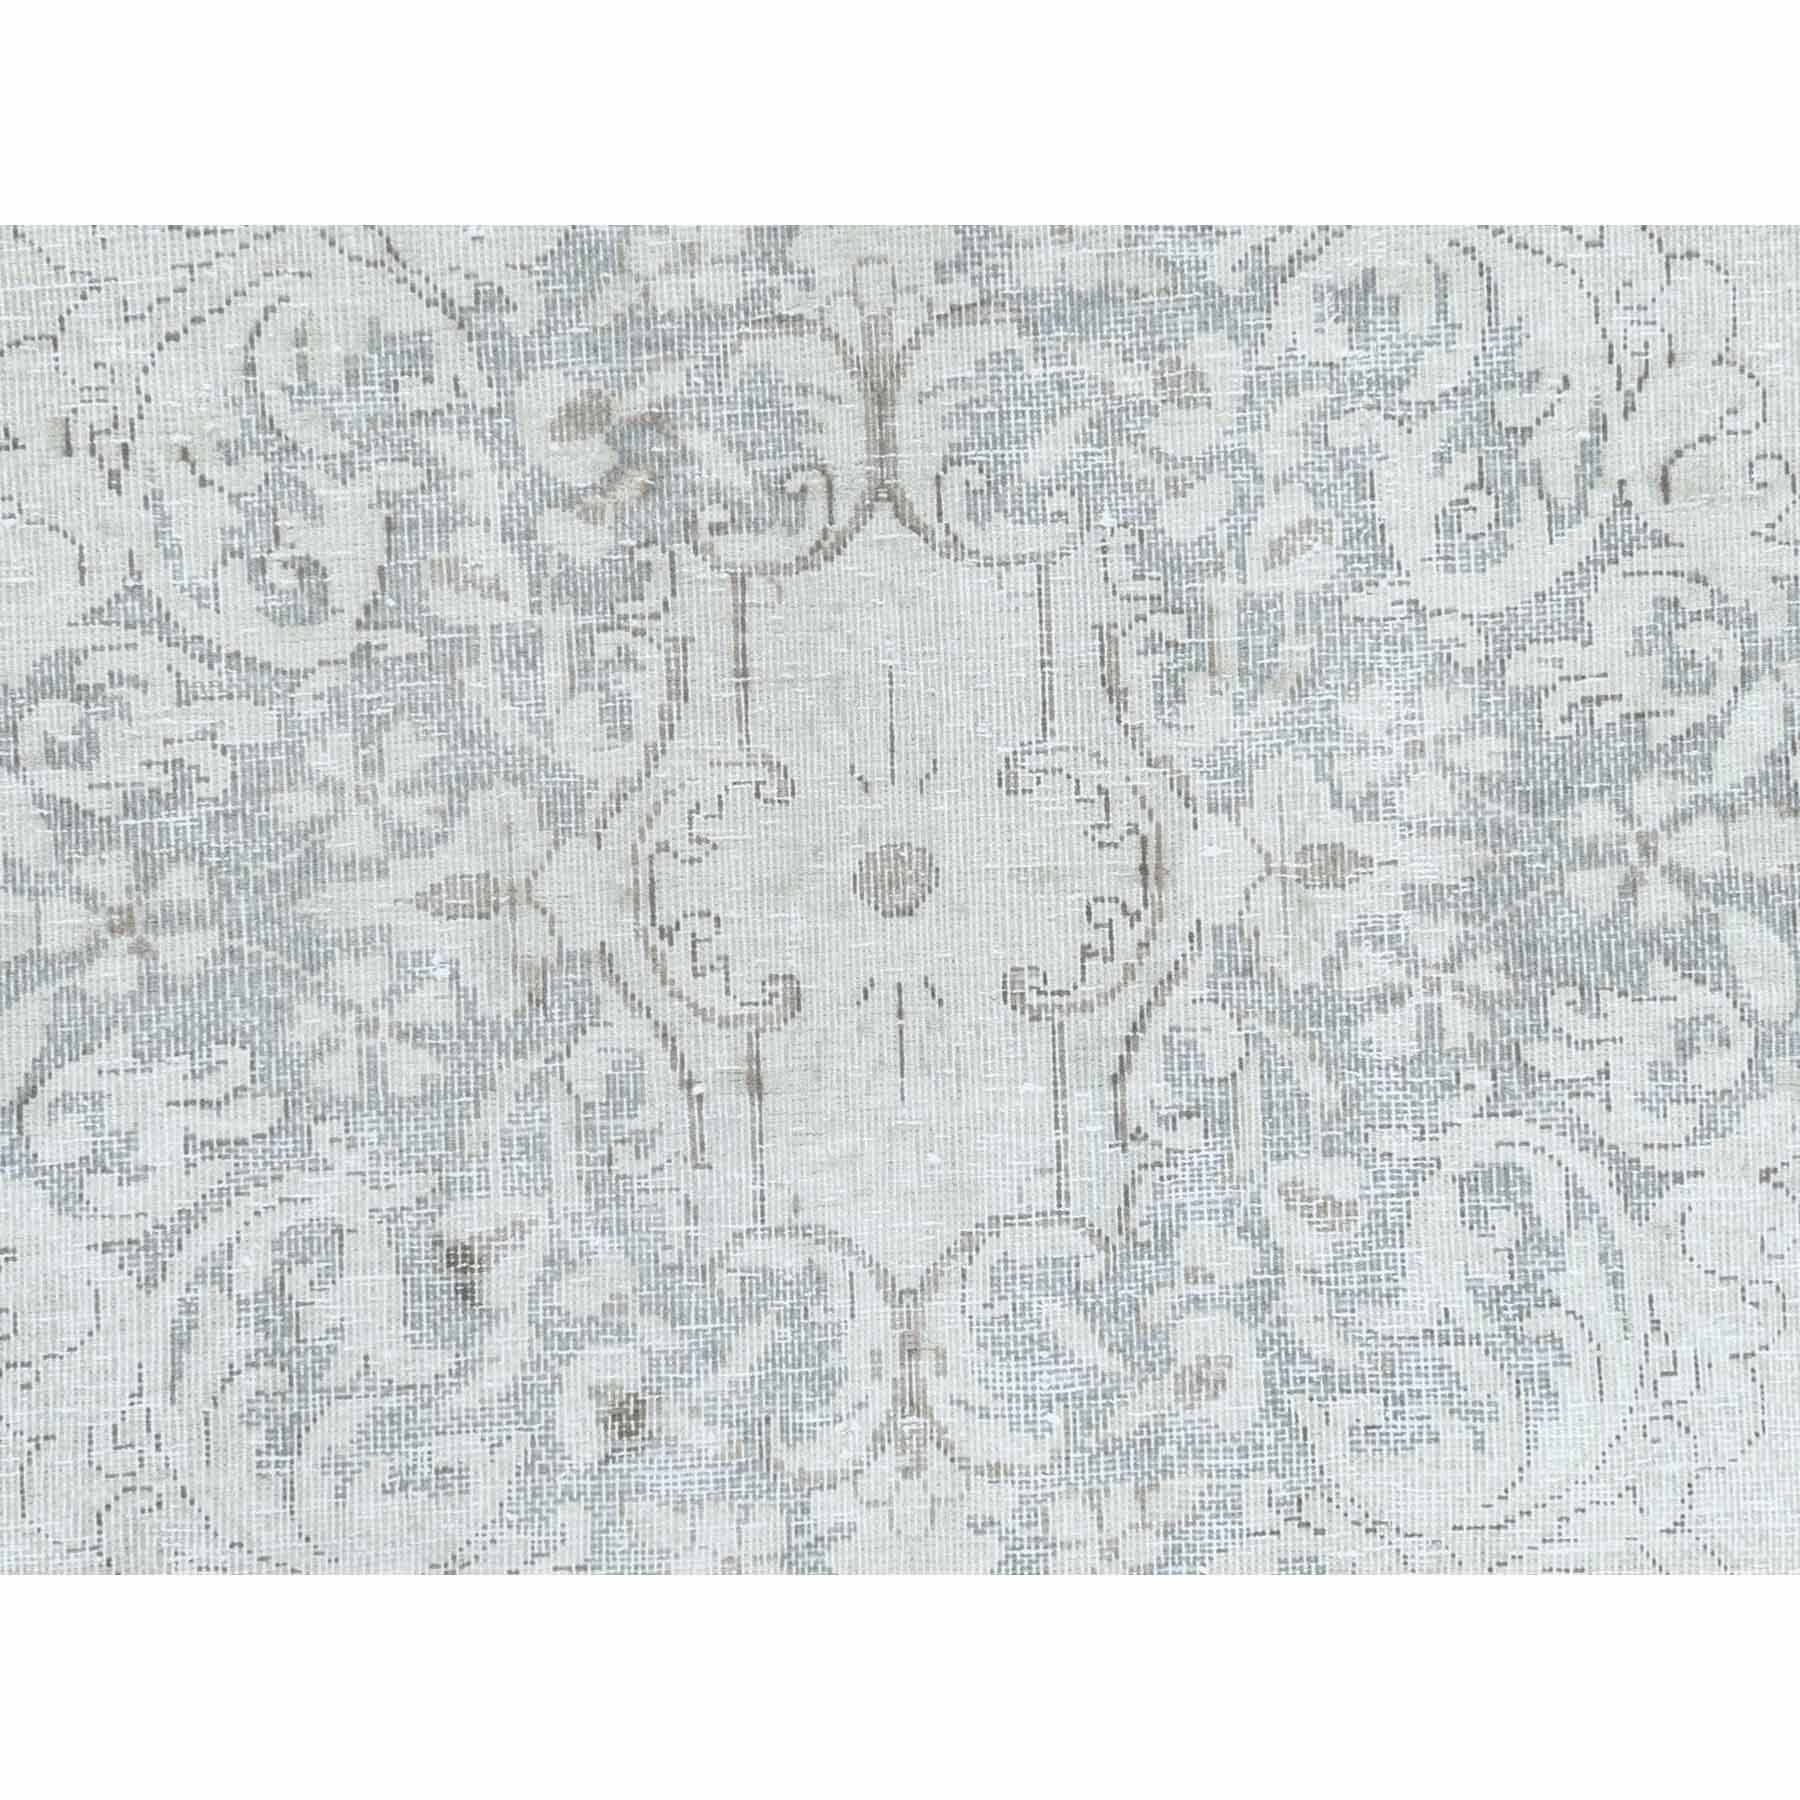 Overdyed-Vintage-Hand-Knotted-Rug-408130